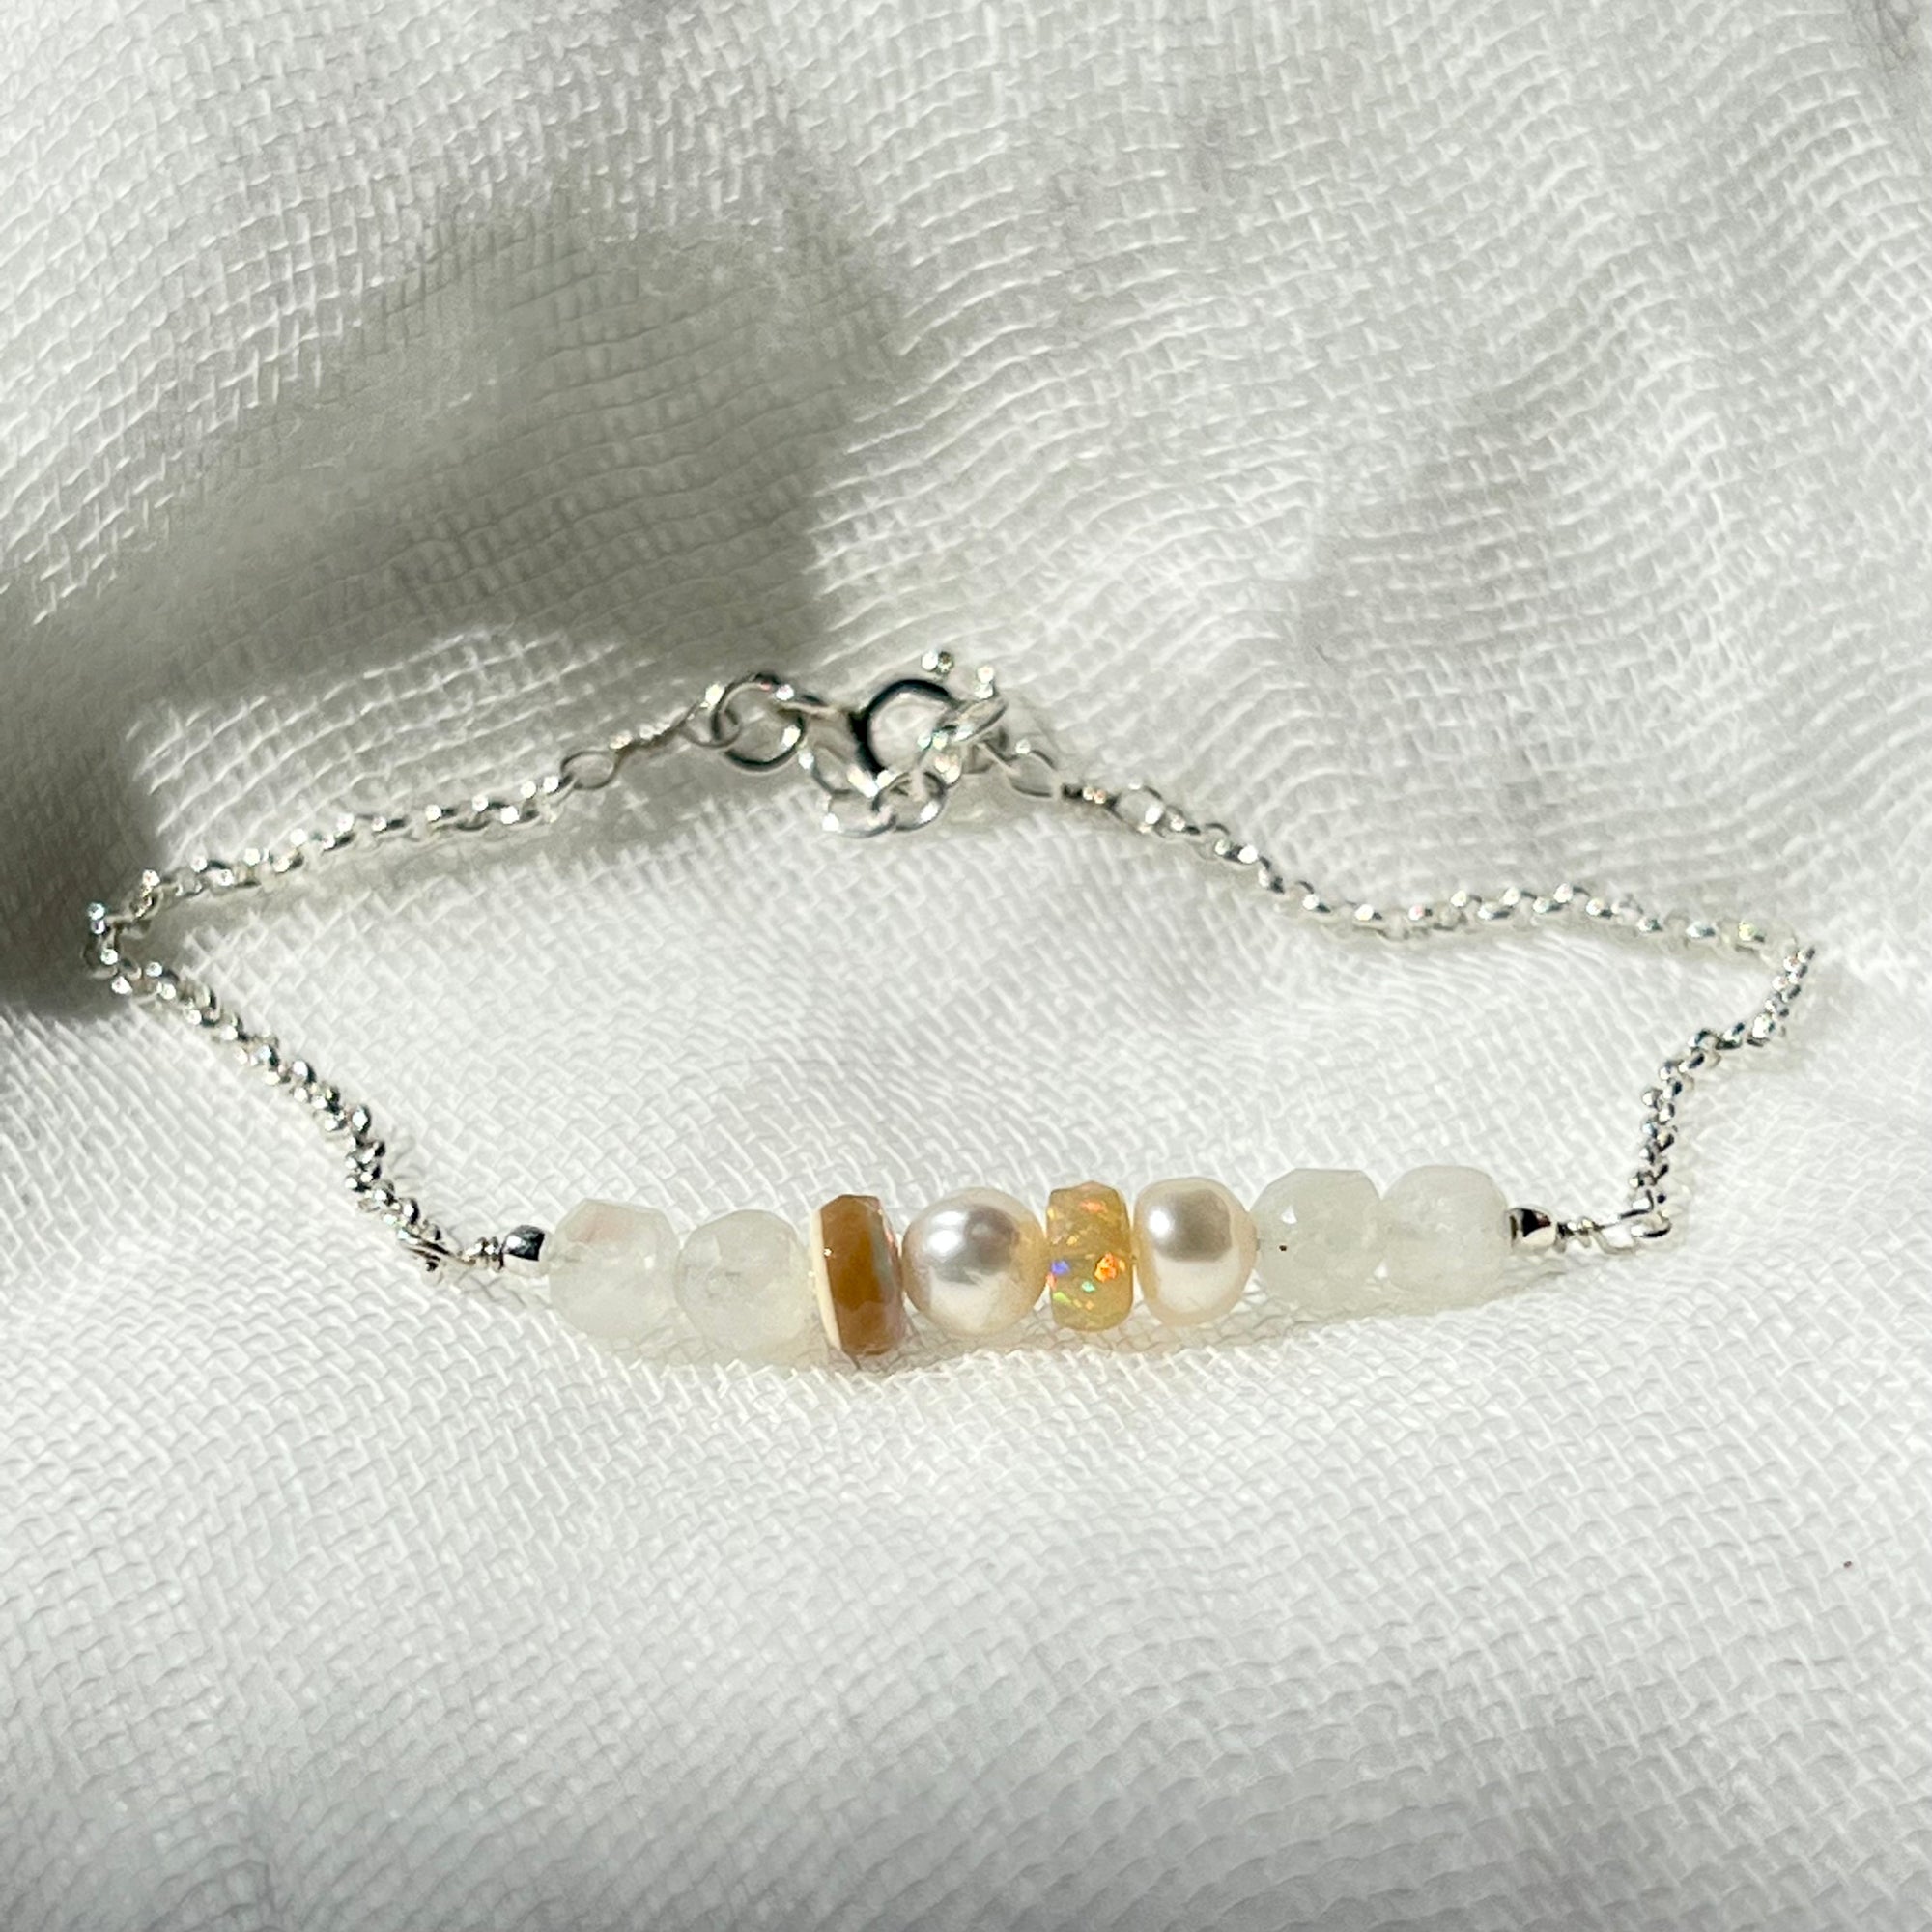 Opal, Moonstone and Pearl Silver Bracelet